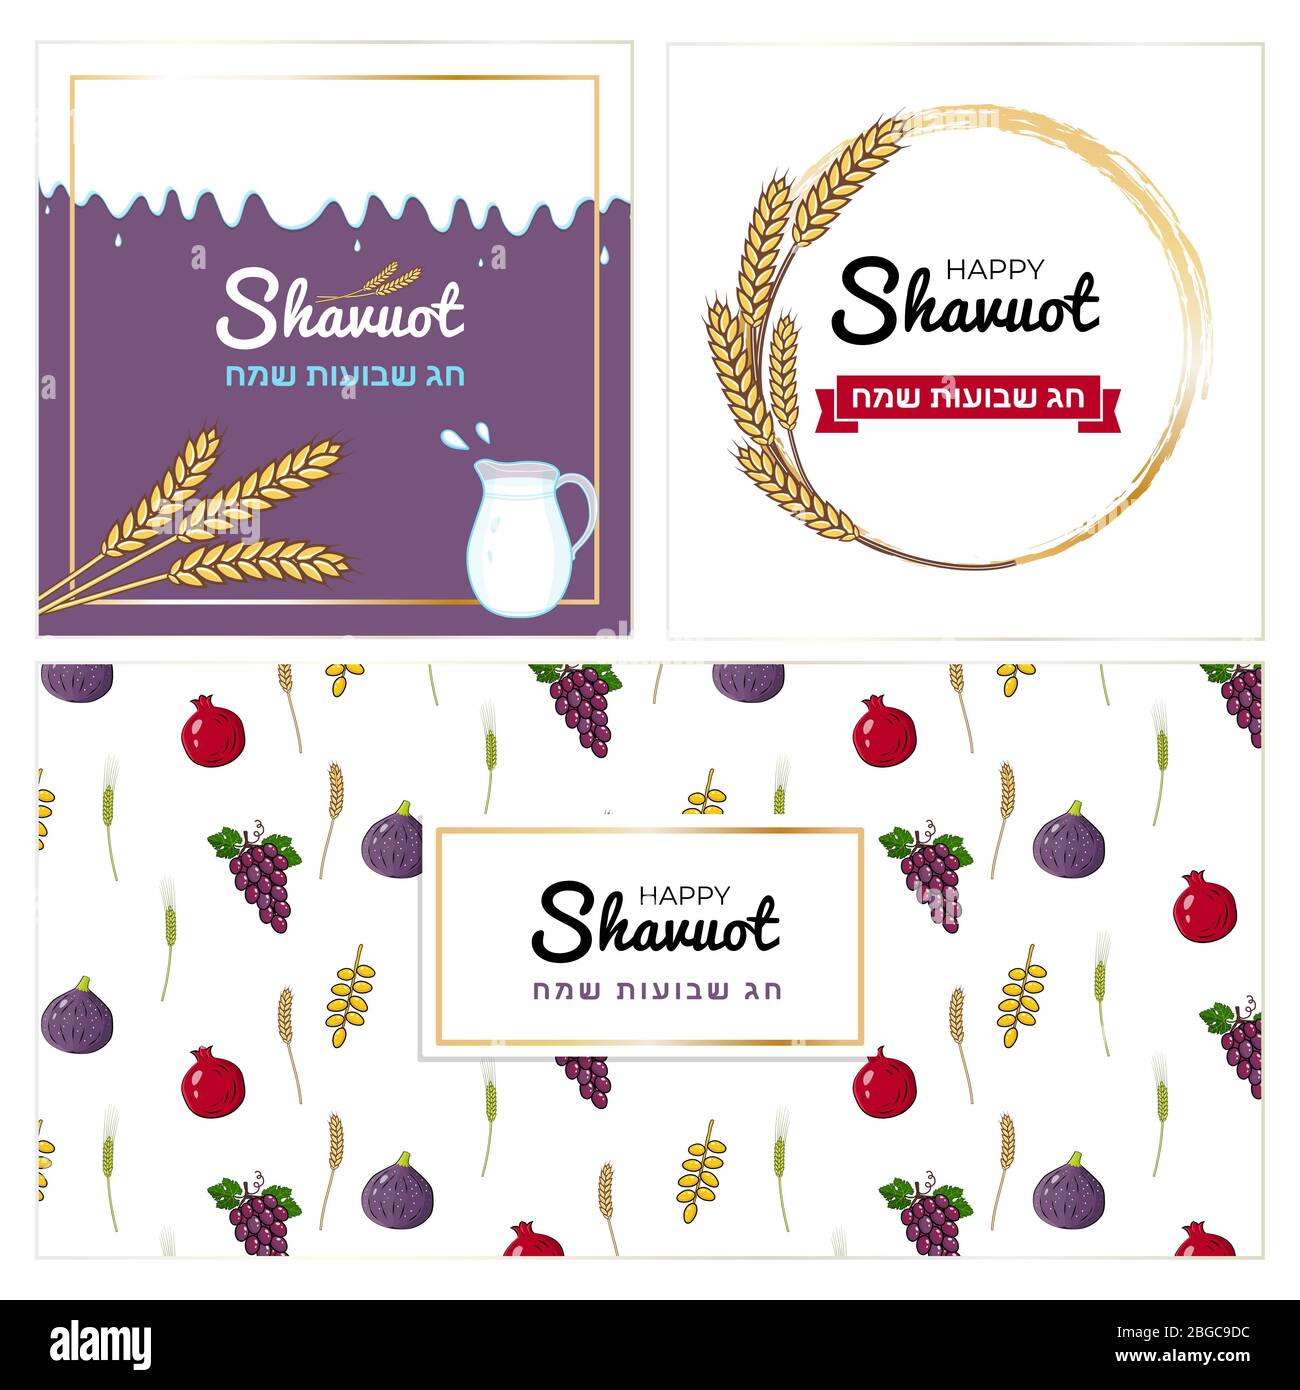 Happy Shavuot Jewish holiday banners set for social media and print Stock Vector